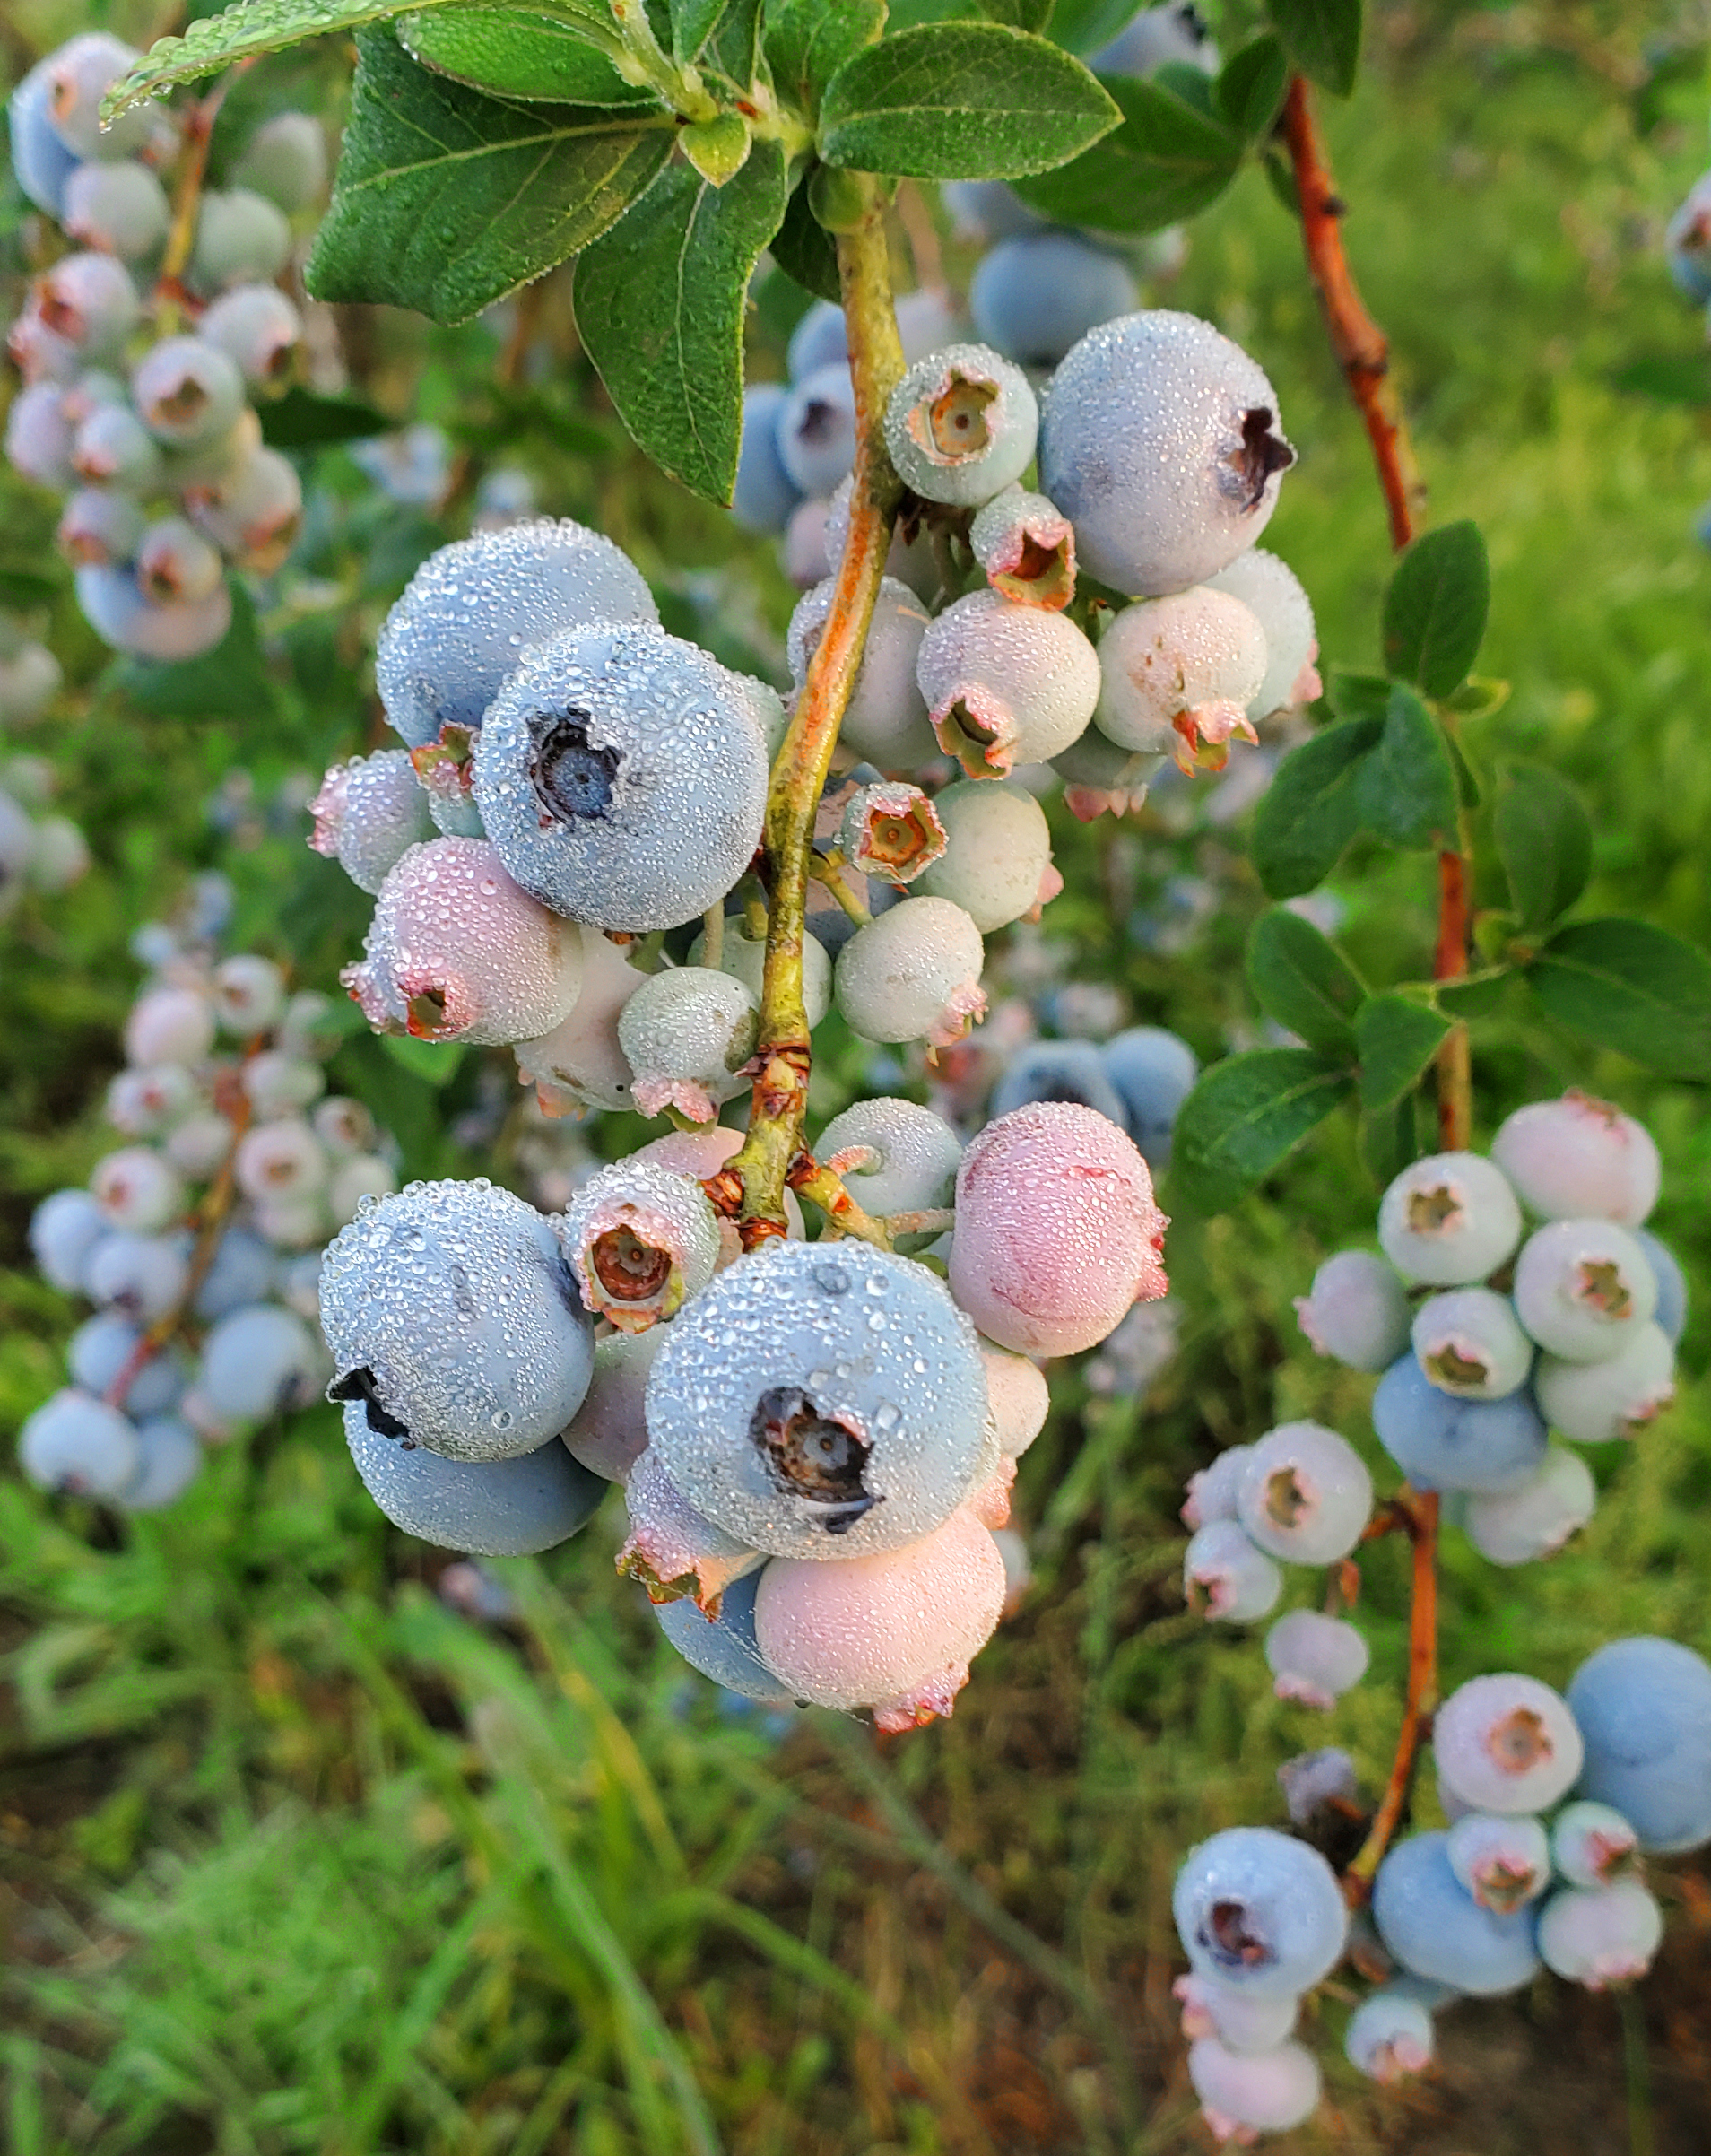 Bluecrop blueberries with dew on them.